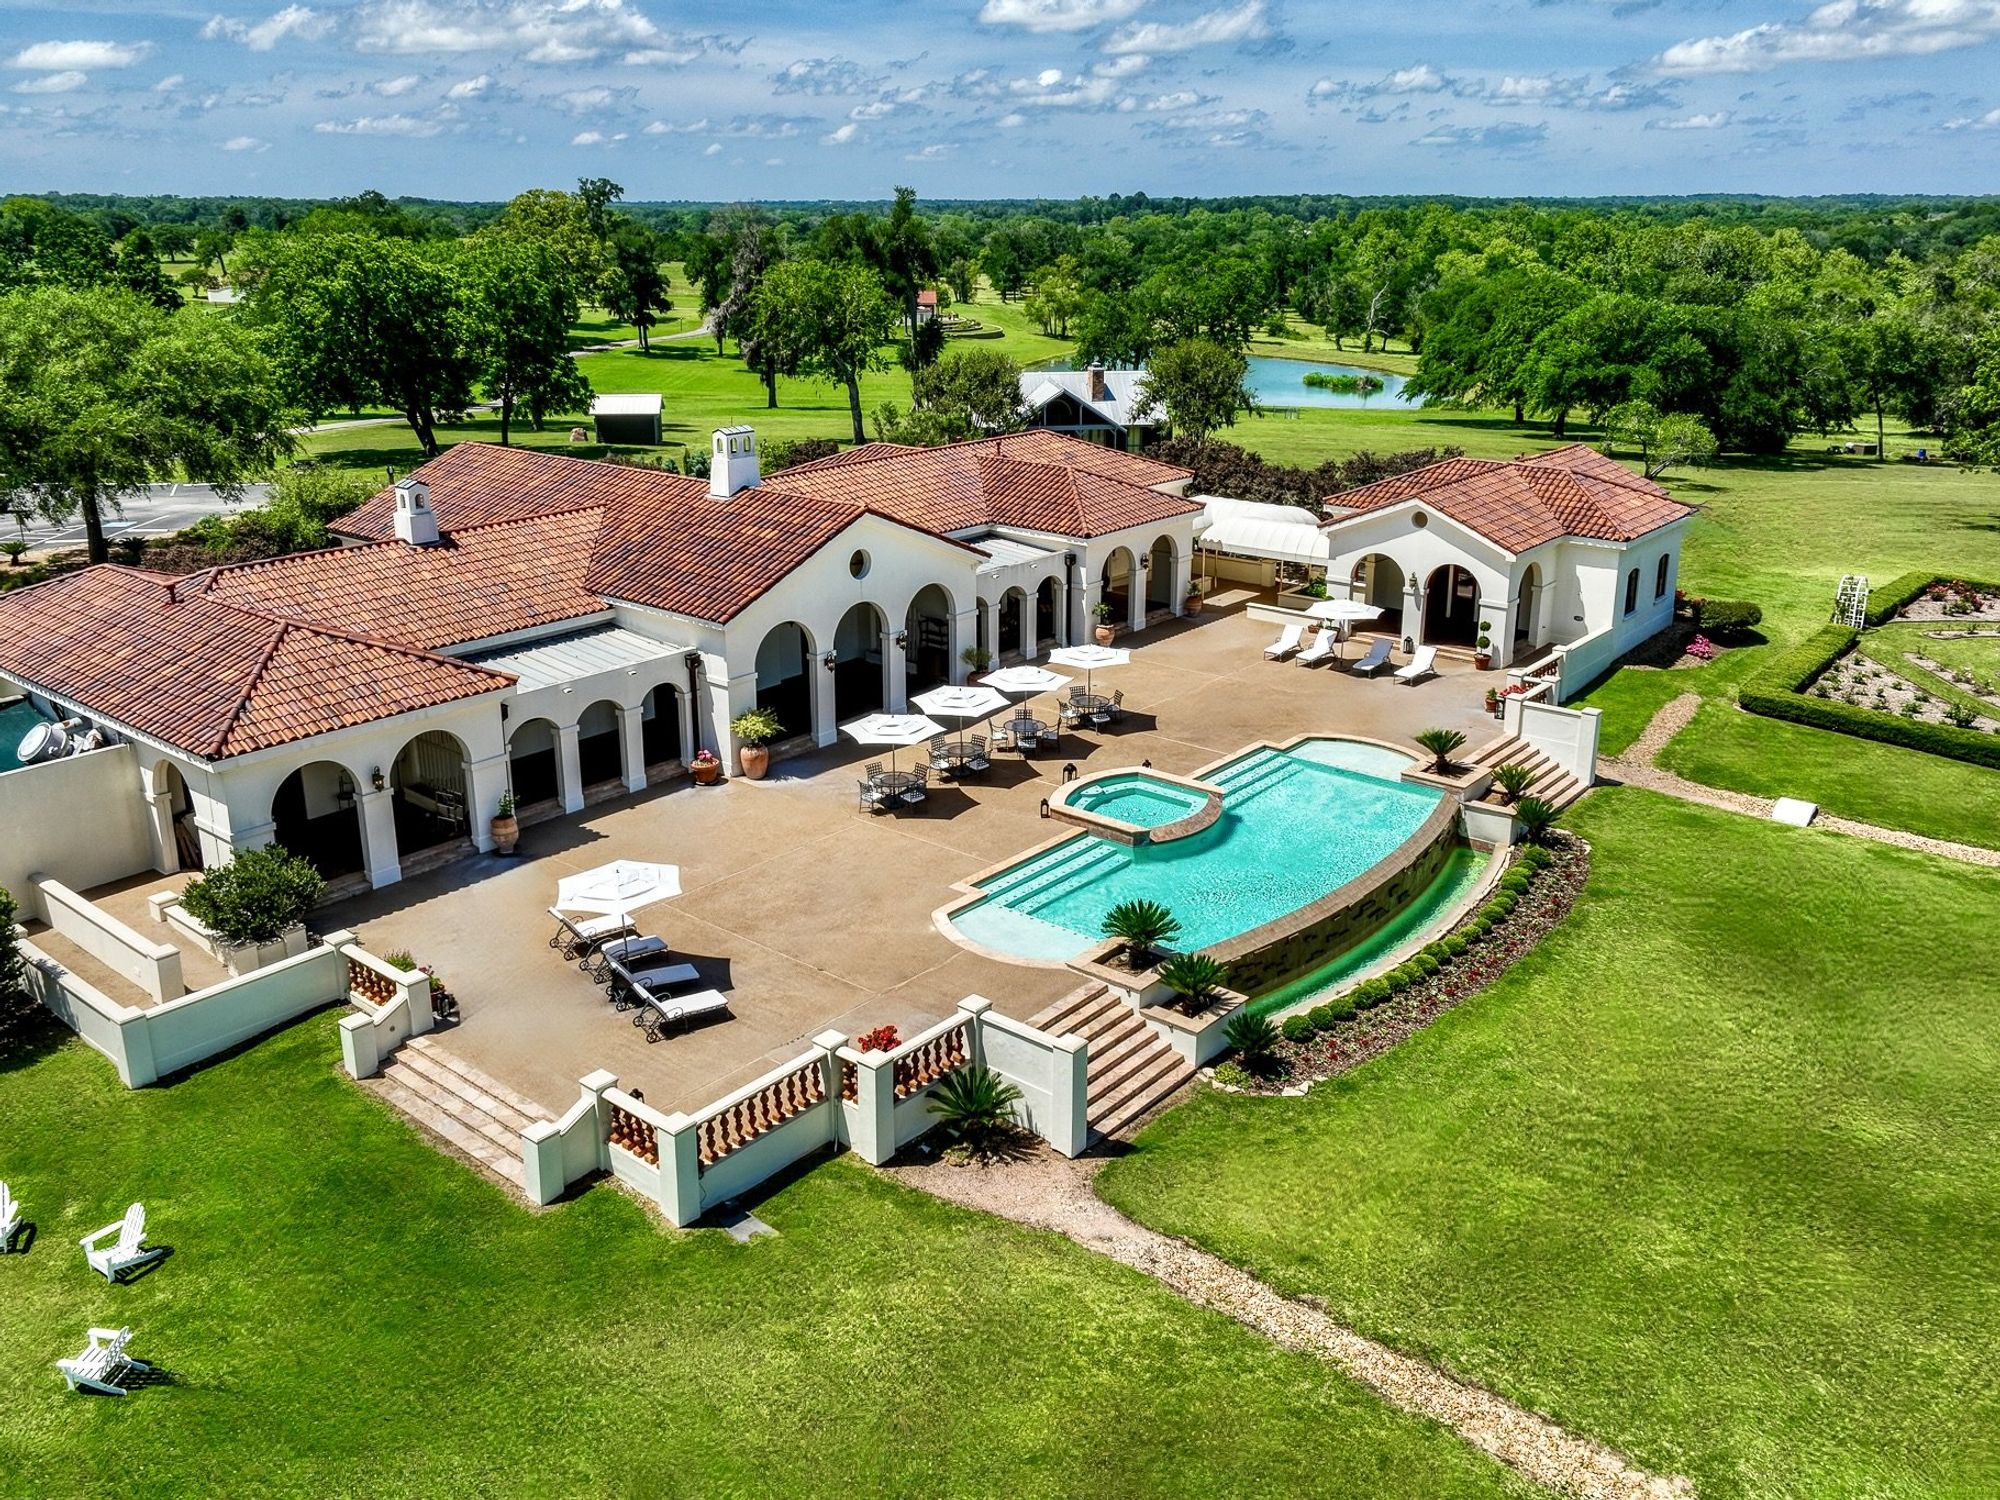 Drake suspected new owner of $15 million Dos Brisas ranch in Texas